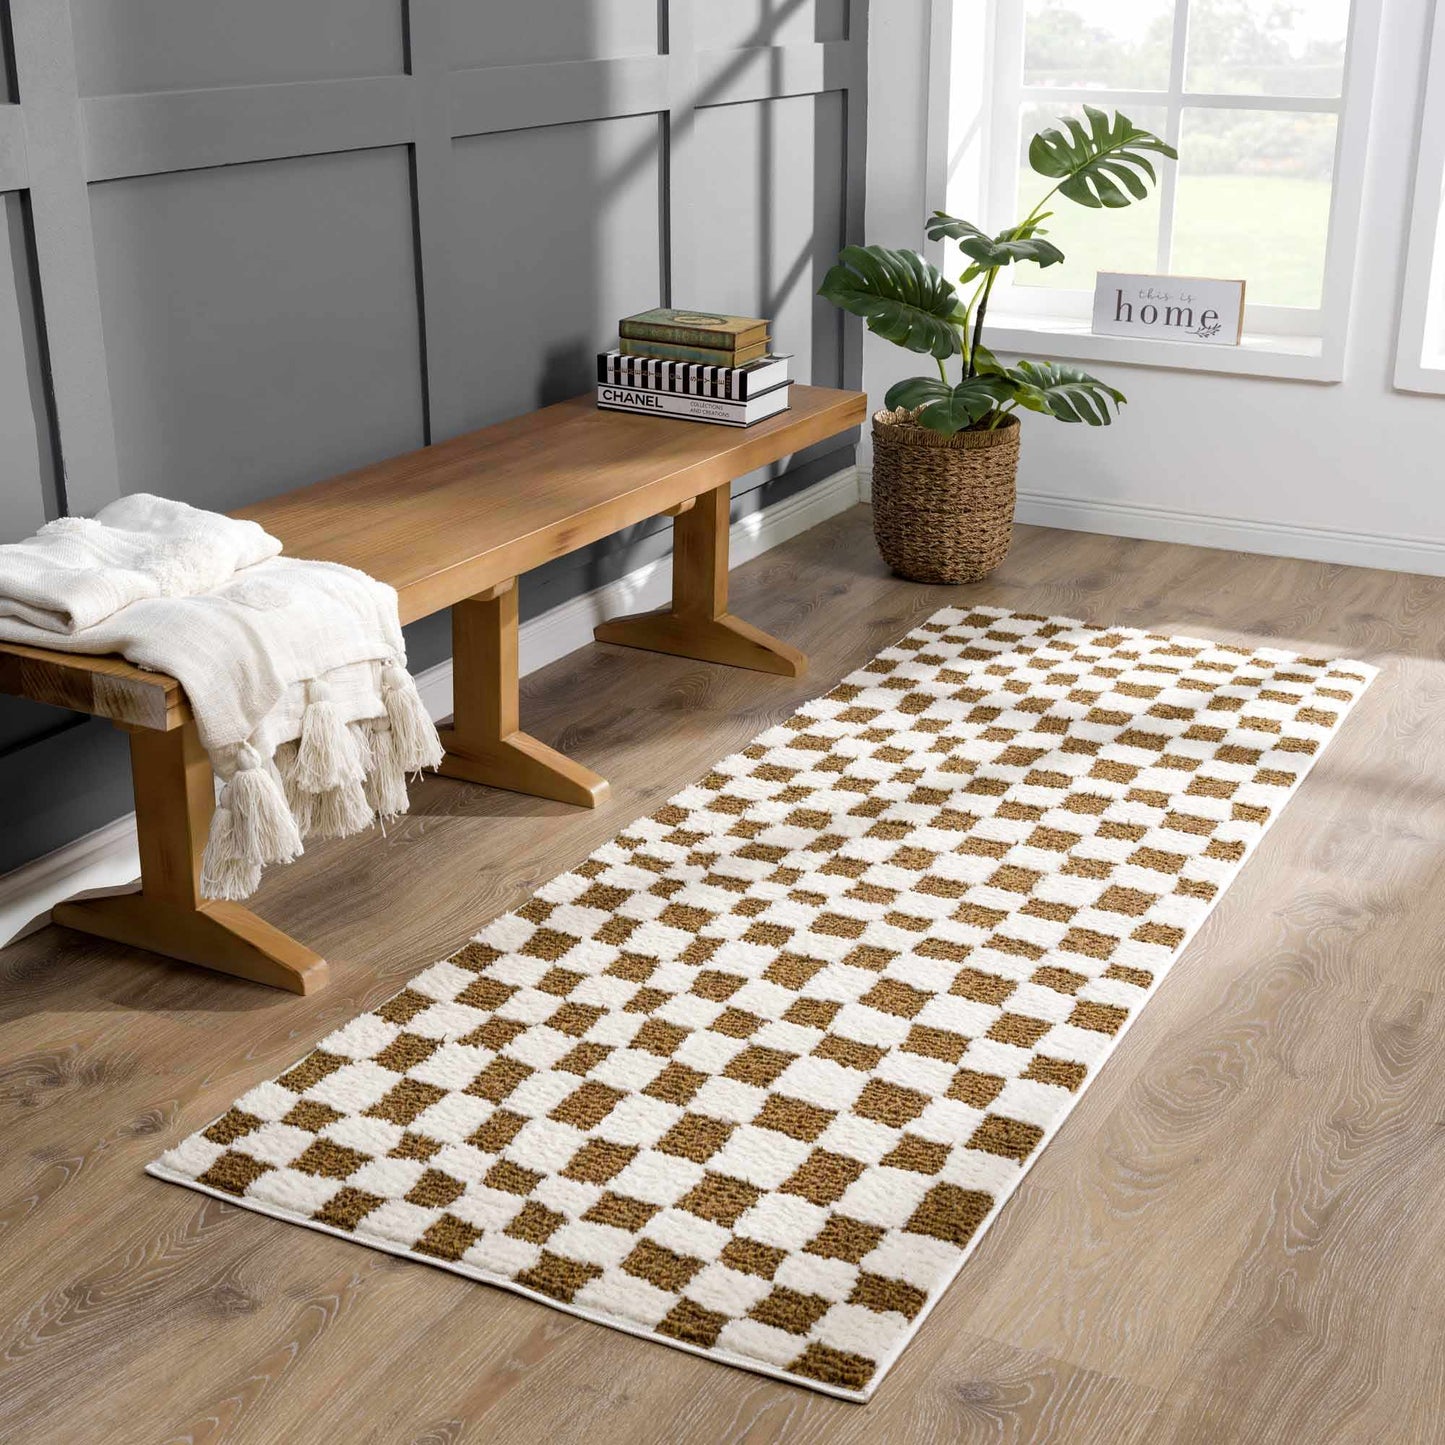 Boutique Rugs Rugs Lajos Brown Checkered Area Rug